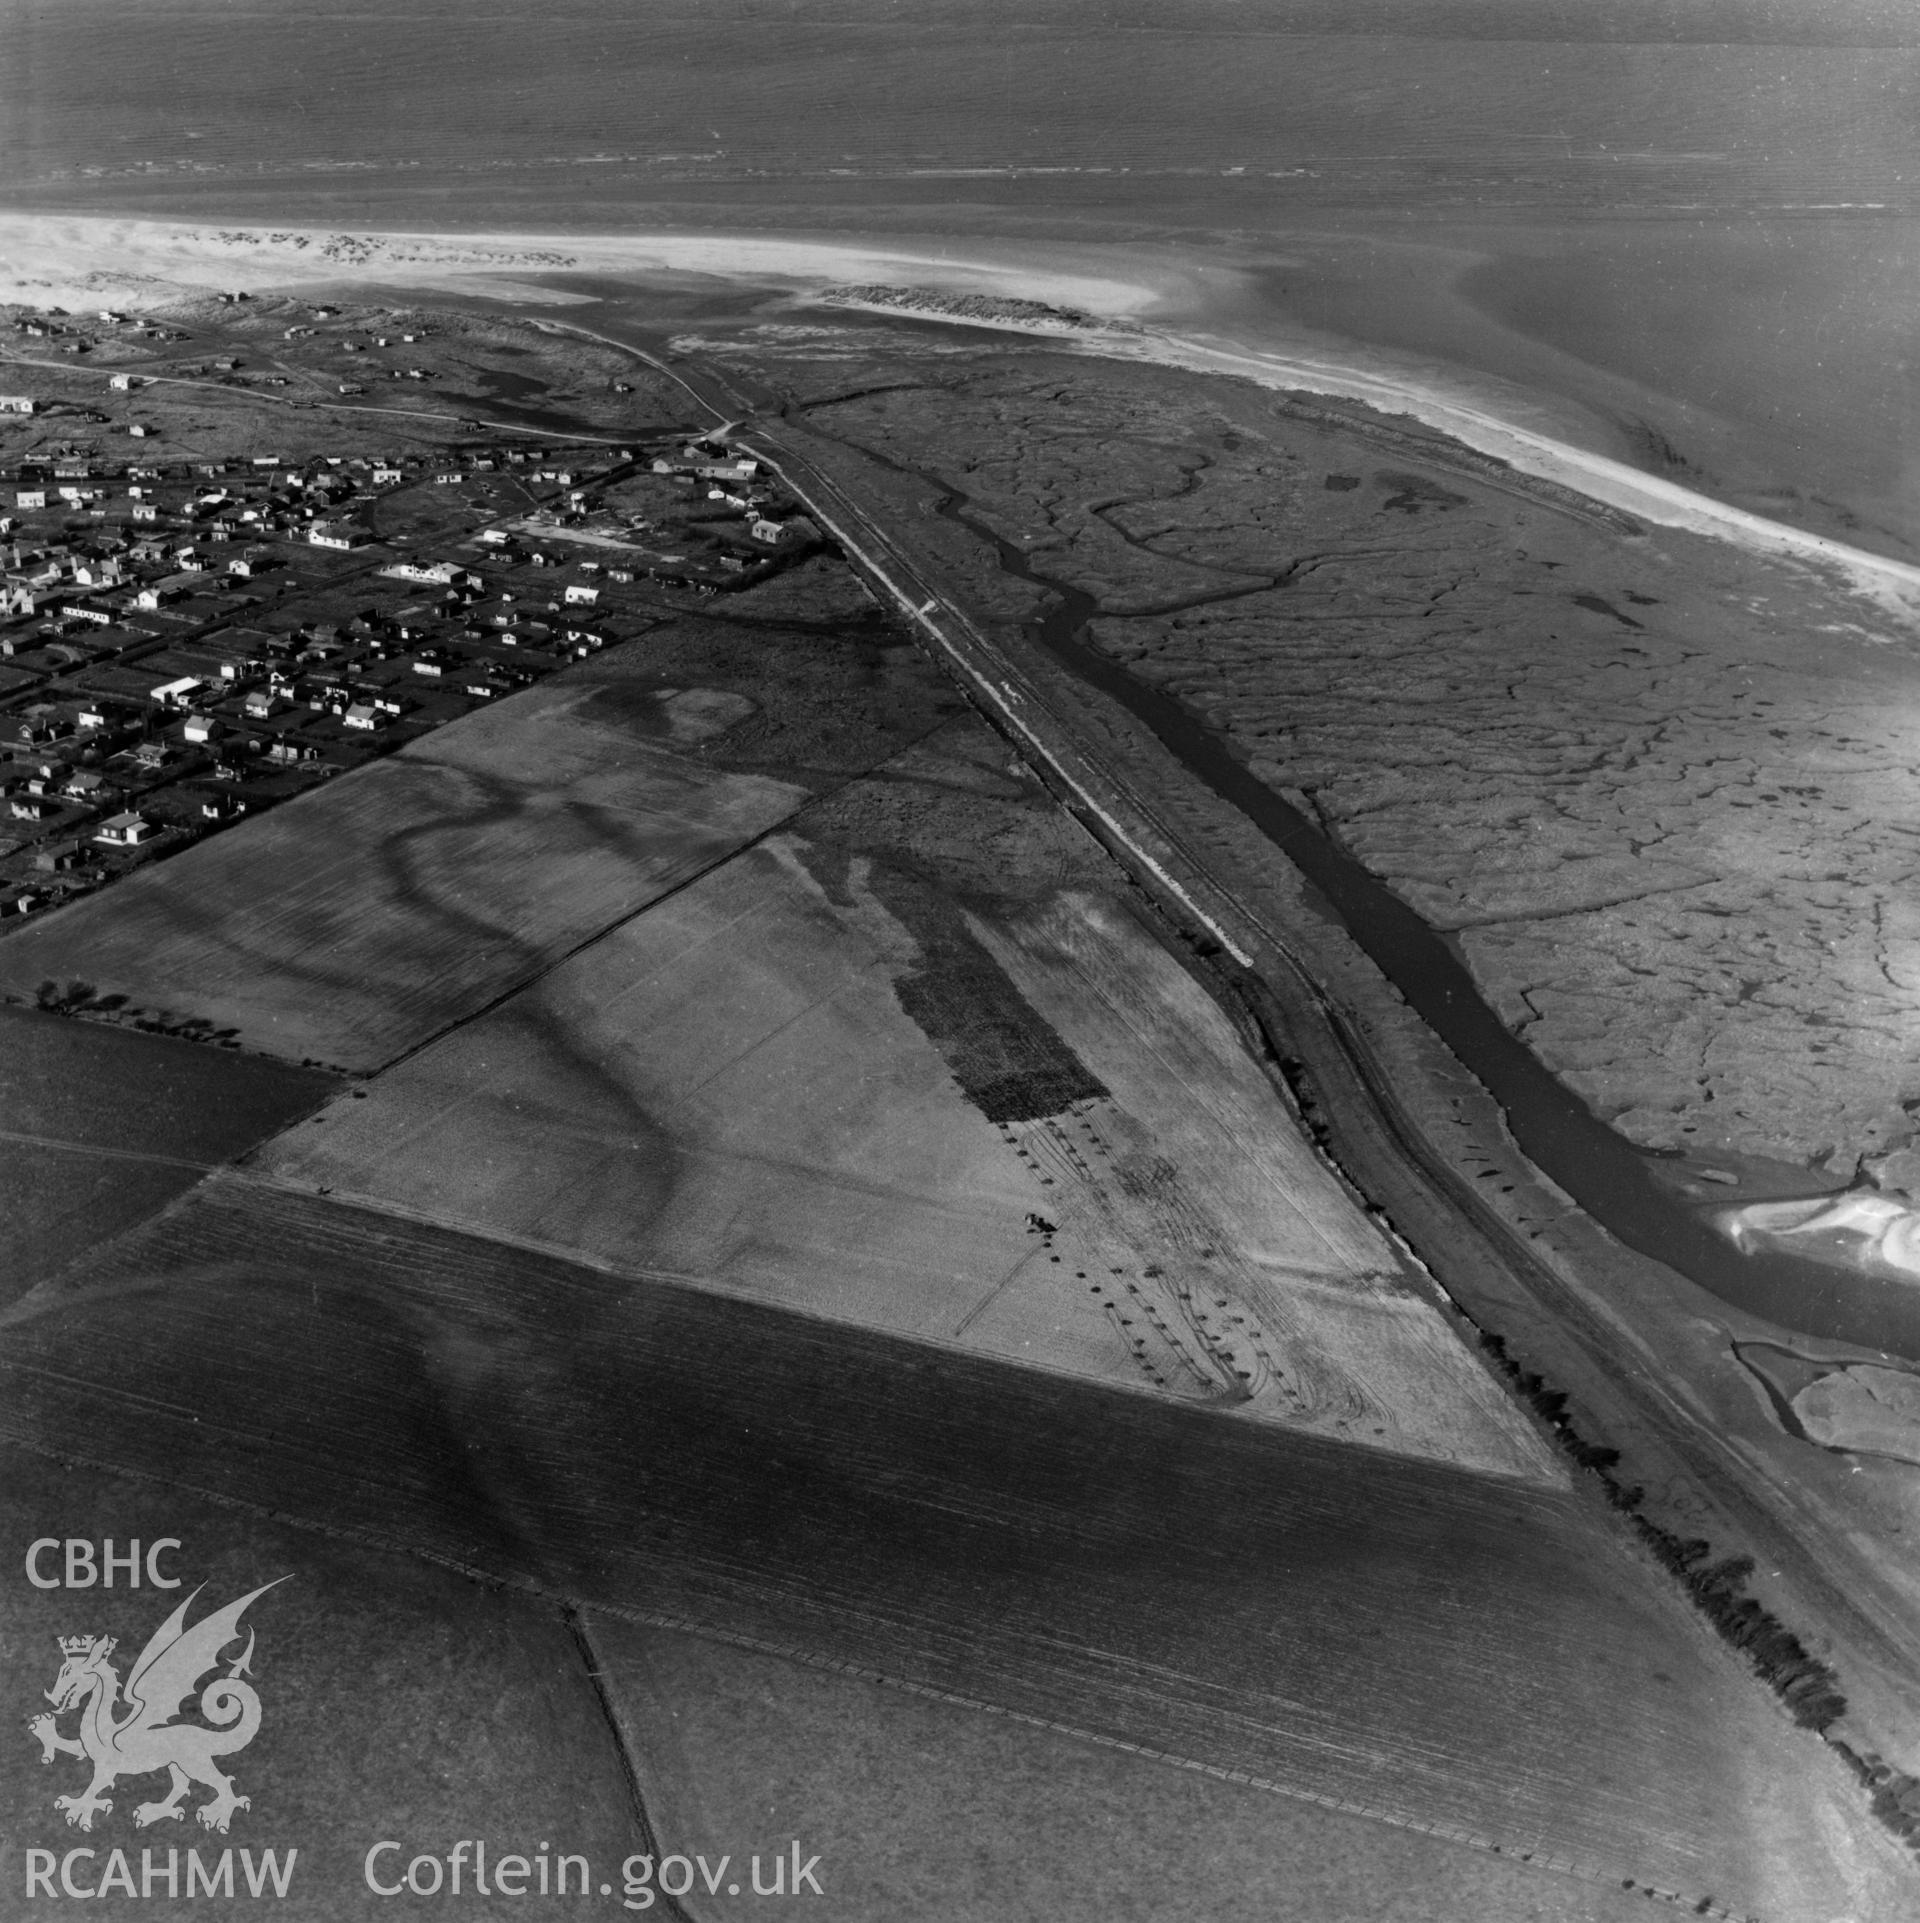 View of caravans and chalets on the Warren, Point of Ayr. Oblique aerial photograph, 5?" cut roll film.